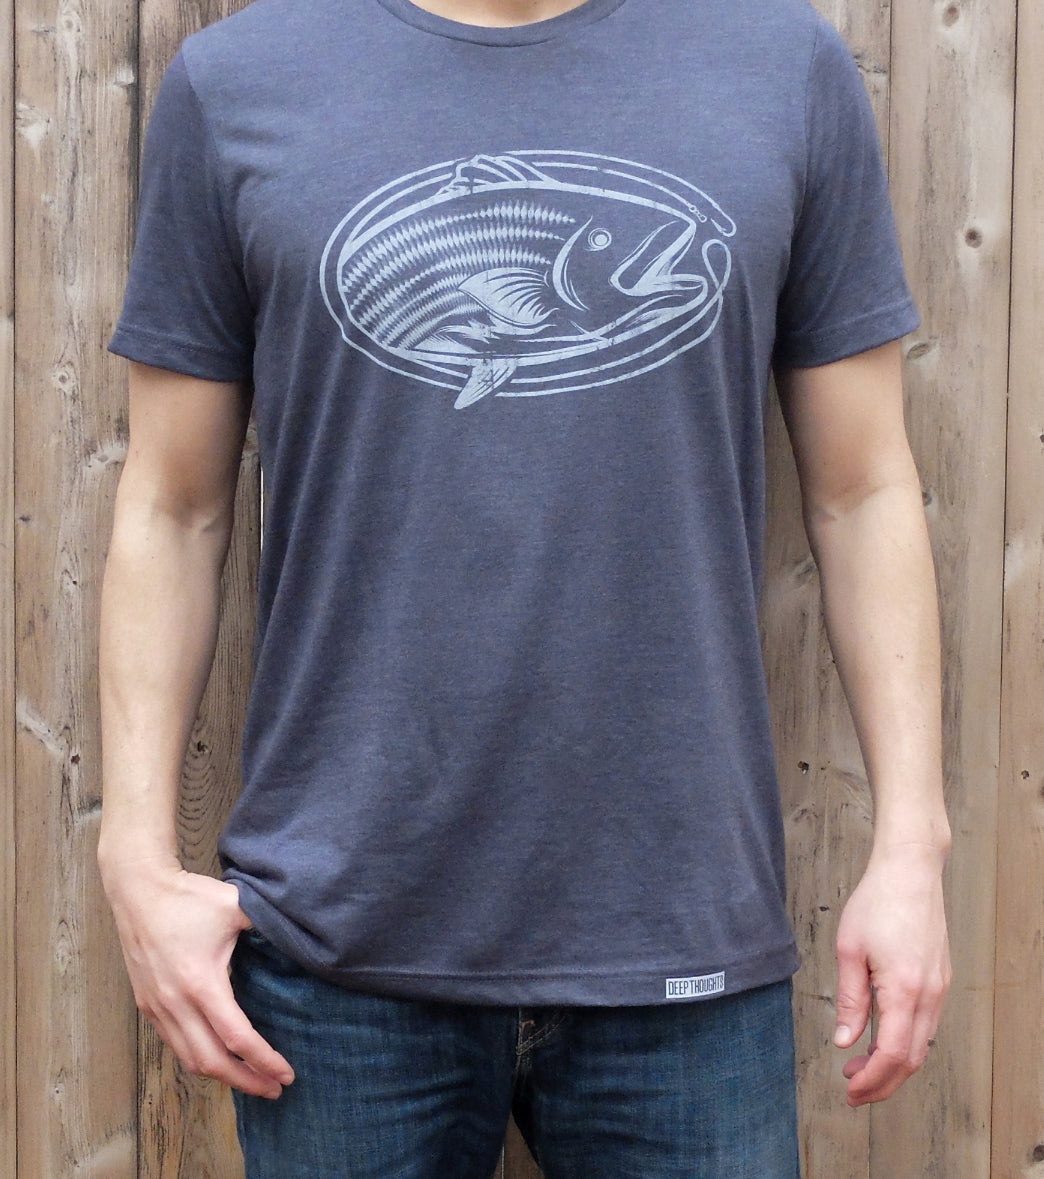 man wearing heather navy blue t-shirt with white oval-shaped striped bass fishing graphic